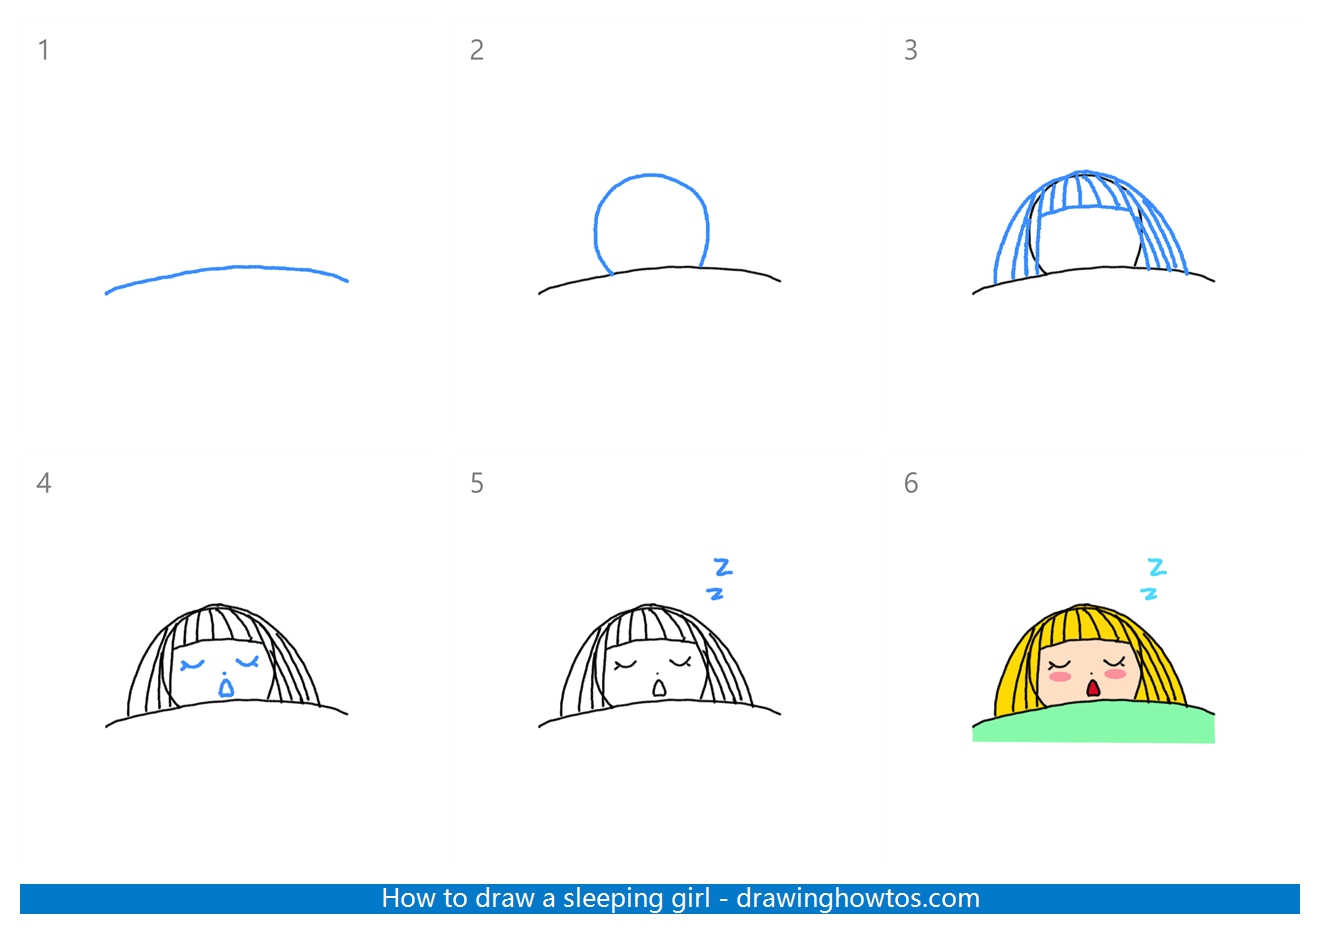 How to Draw a Sleeping Girl Step by Step